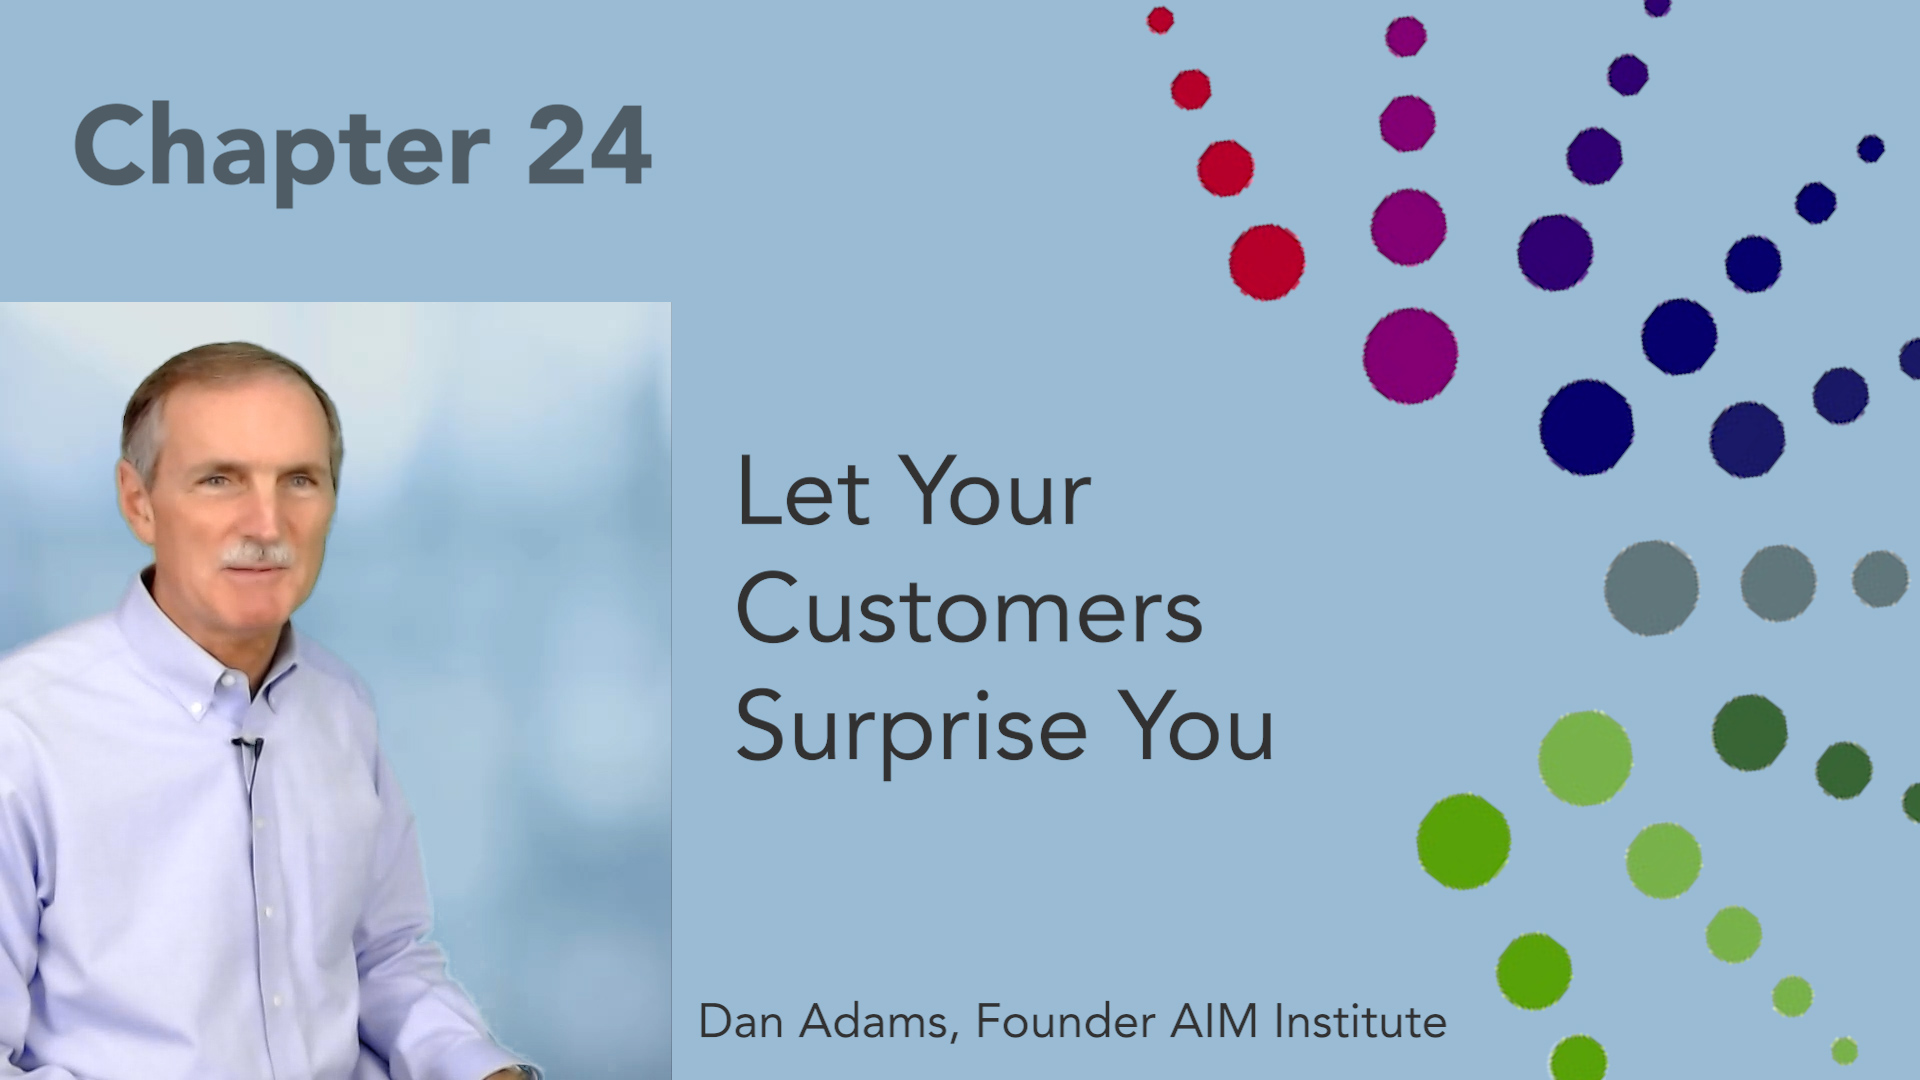 Featured image for “Let Your Customers Surprise You”